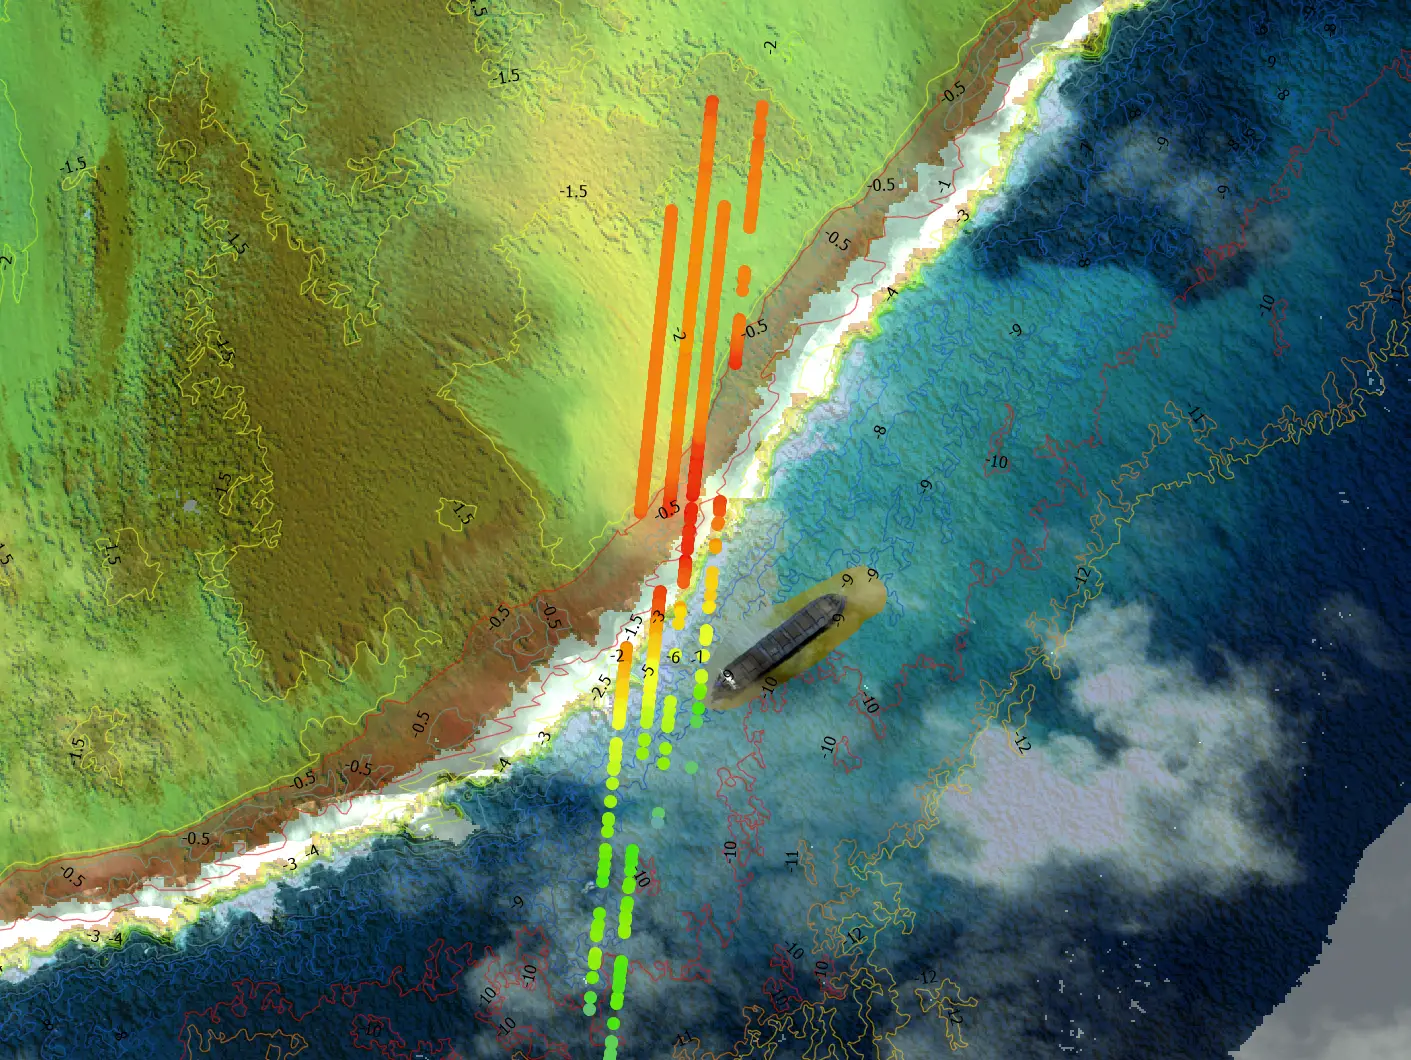 TCarta 2m Satellite Derived Bathymetric,Mapping, data and ICESat-2 tracks overlaid on Maxar WorldView satellite image showing the WV Wakashio wreck near Mauritius. (Image Credit: Maxar Technologies)